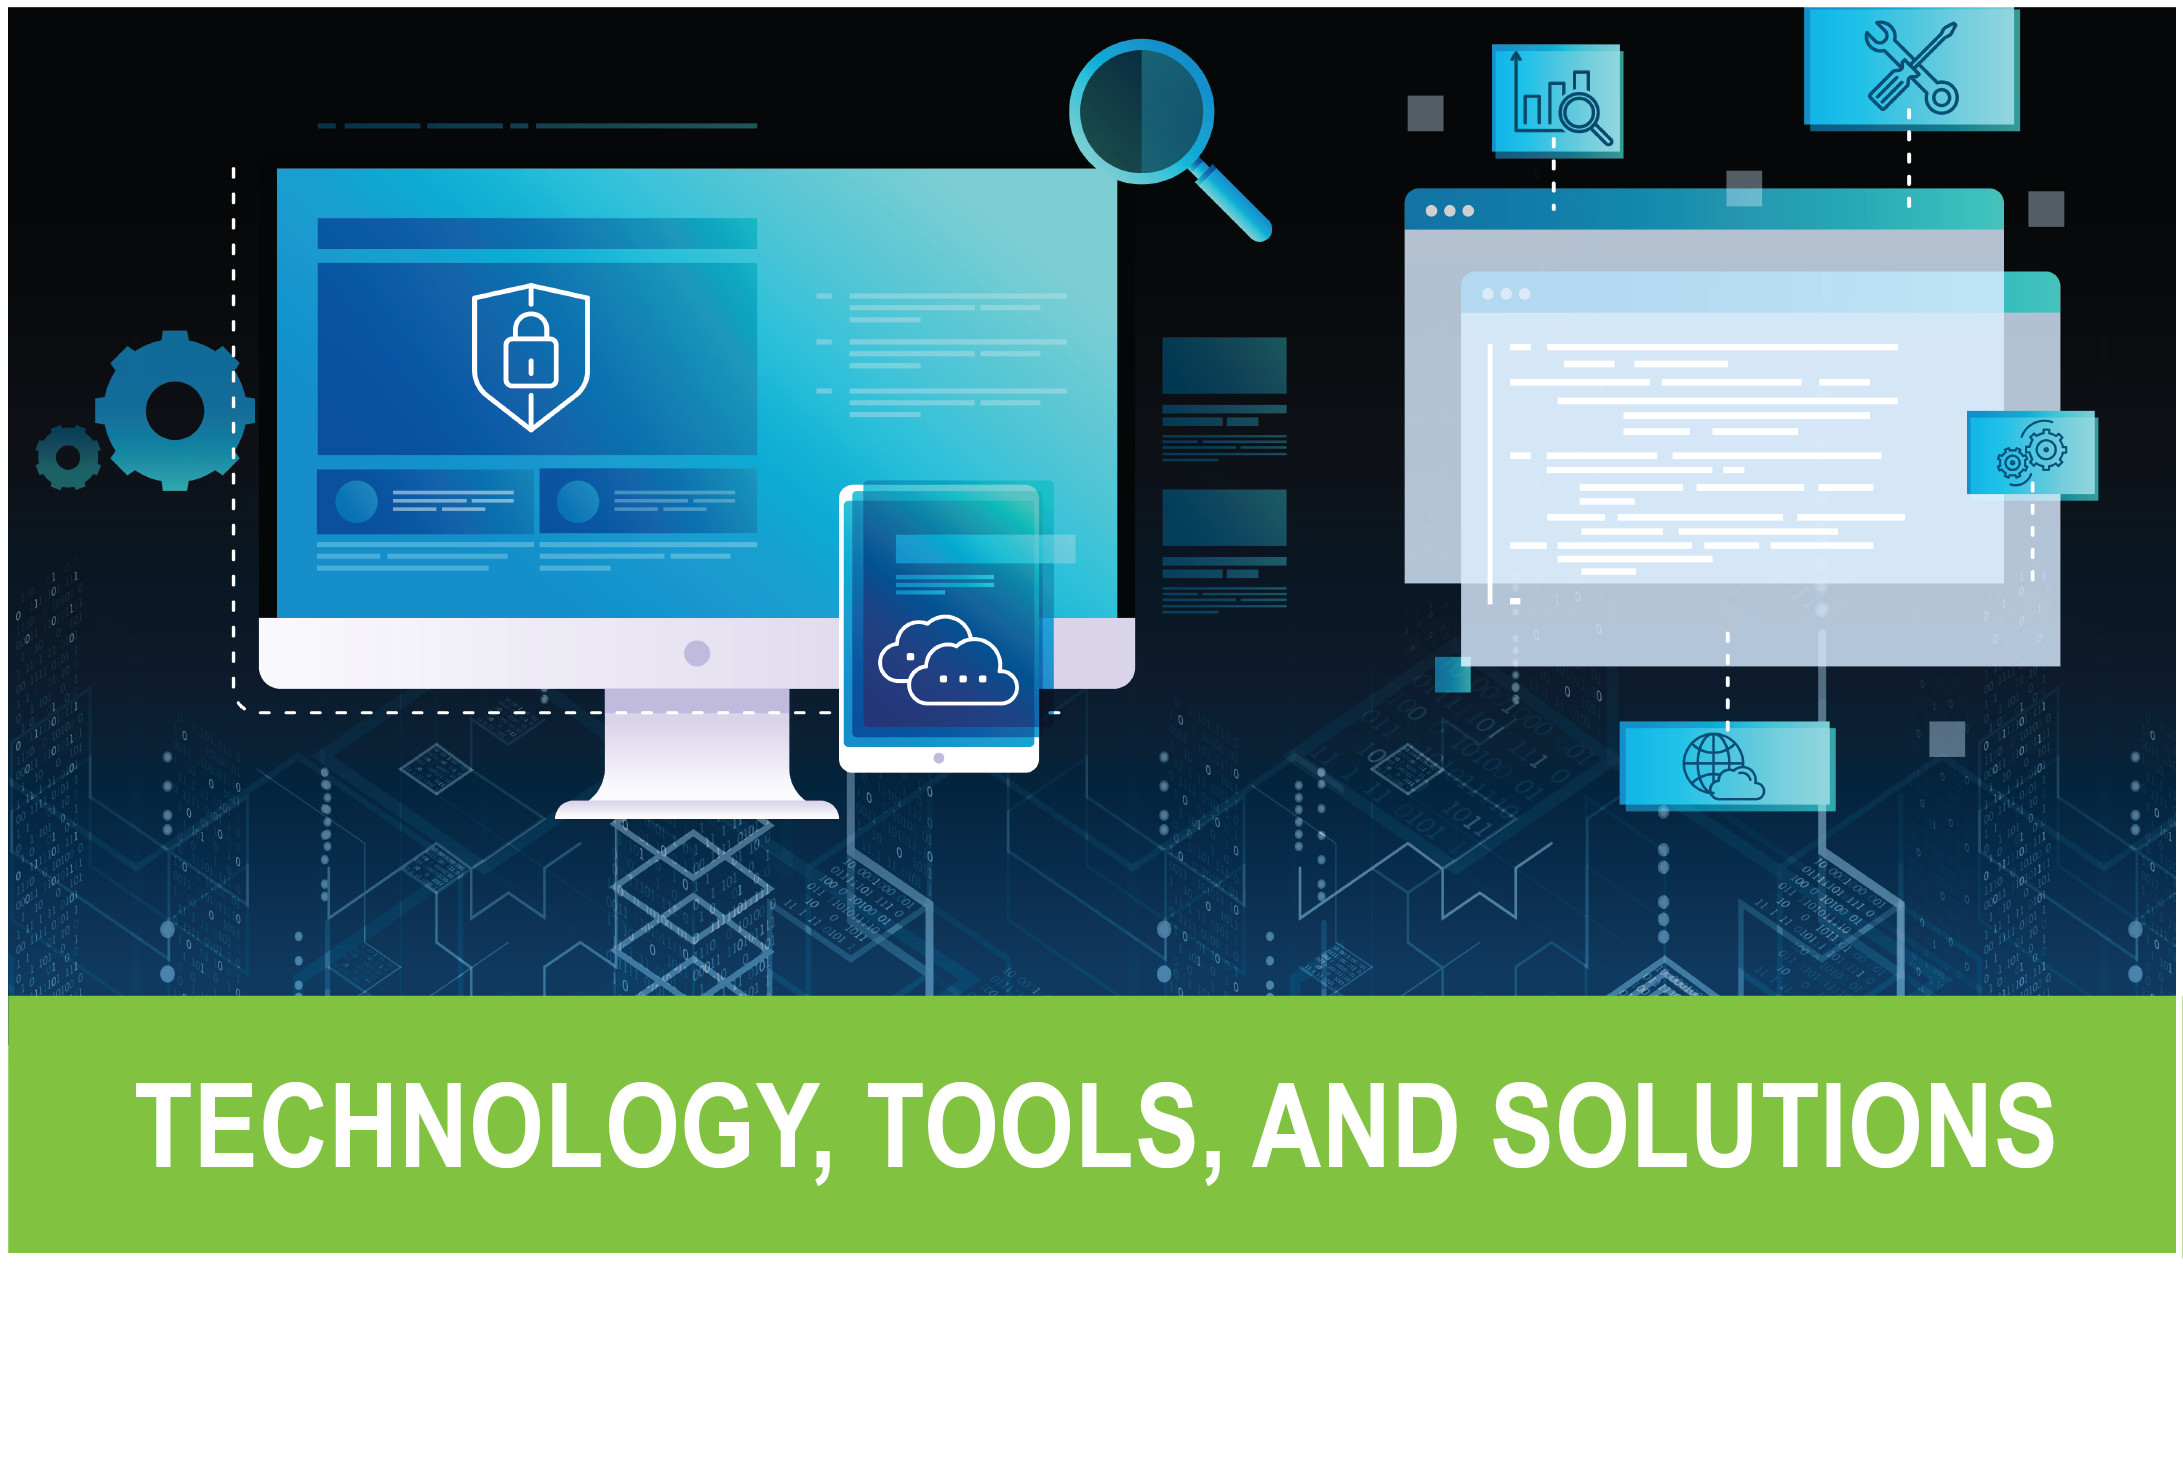 Technoloy, Tools, and Solutions